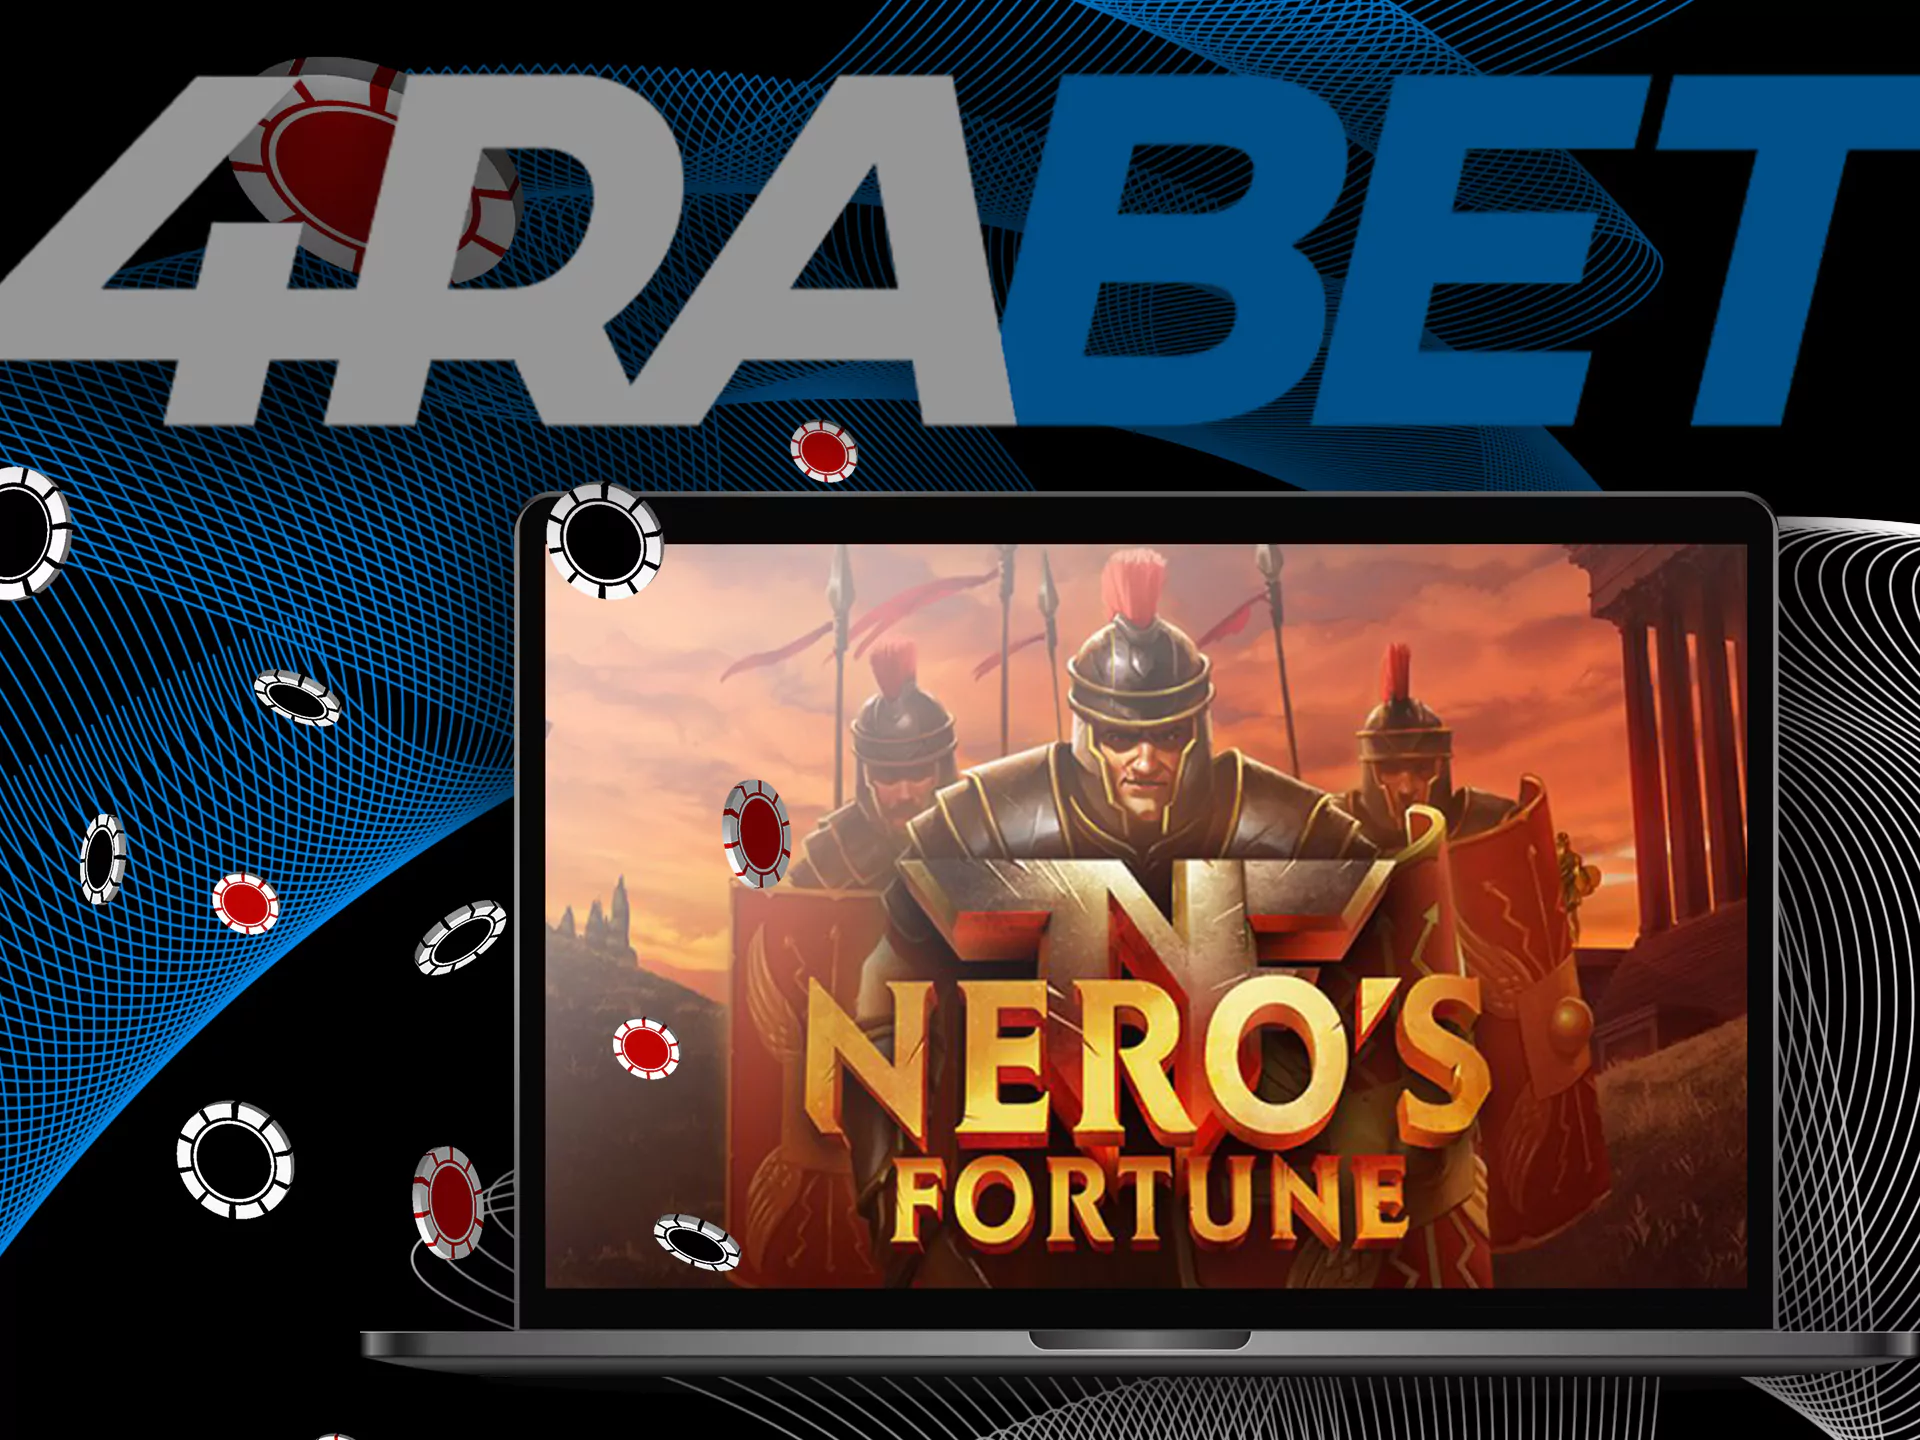 Nero’s Fortune — one of the most best Casino game at 4rabet Bookie.